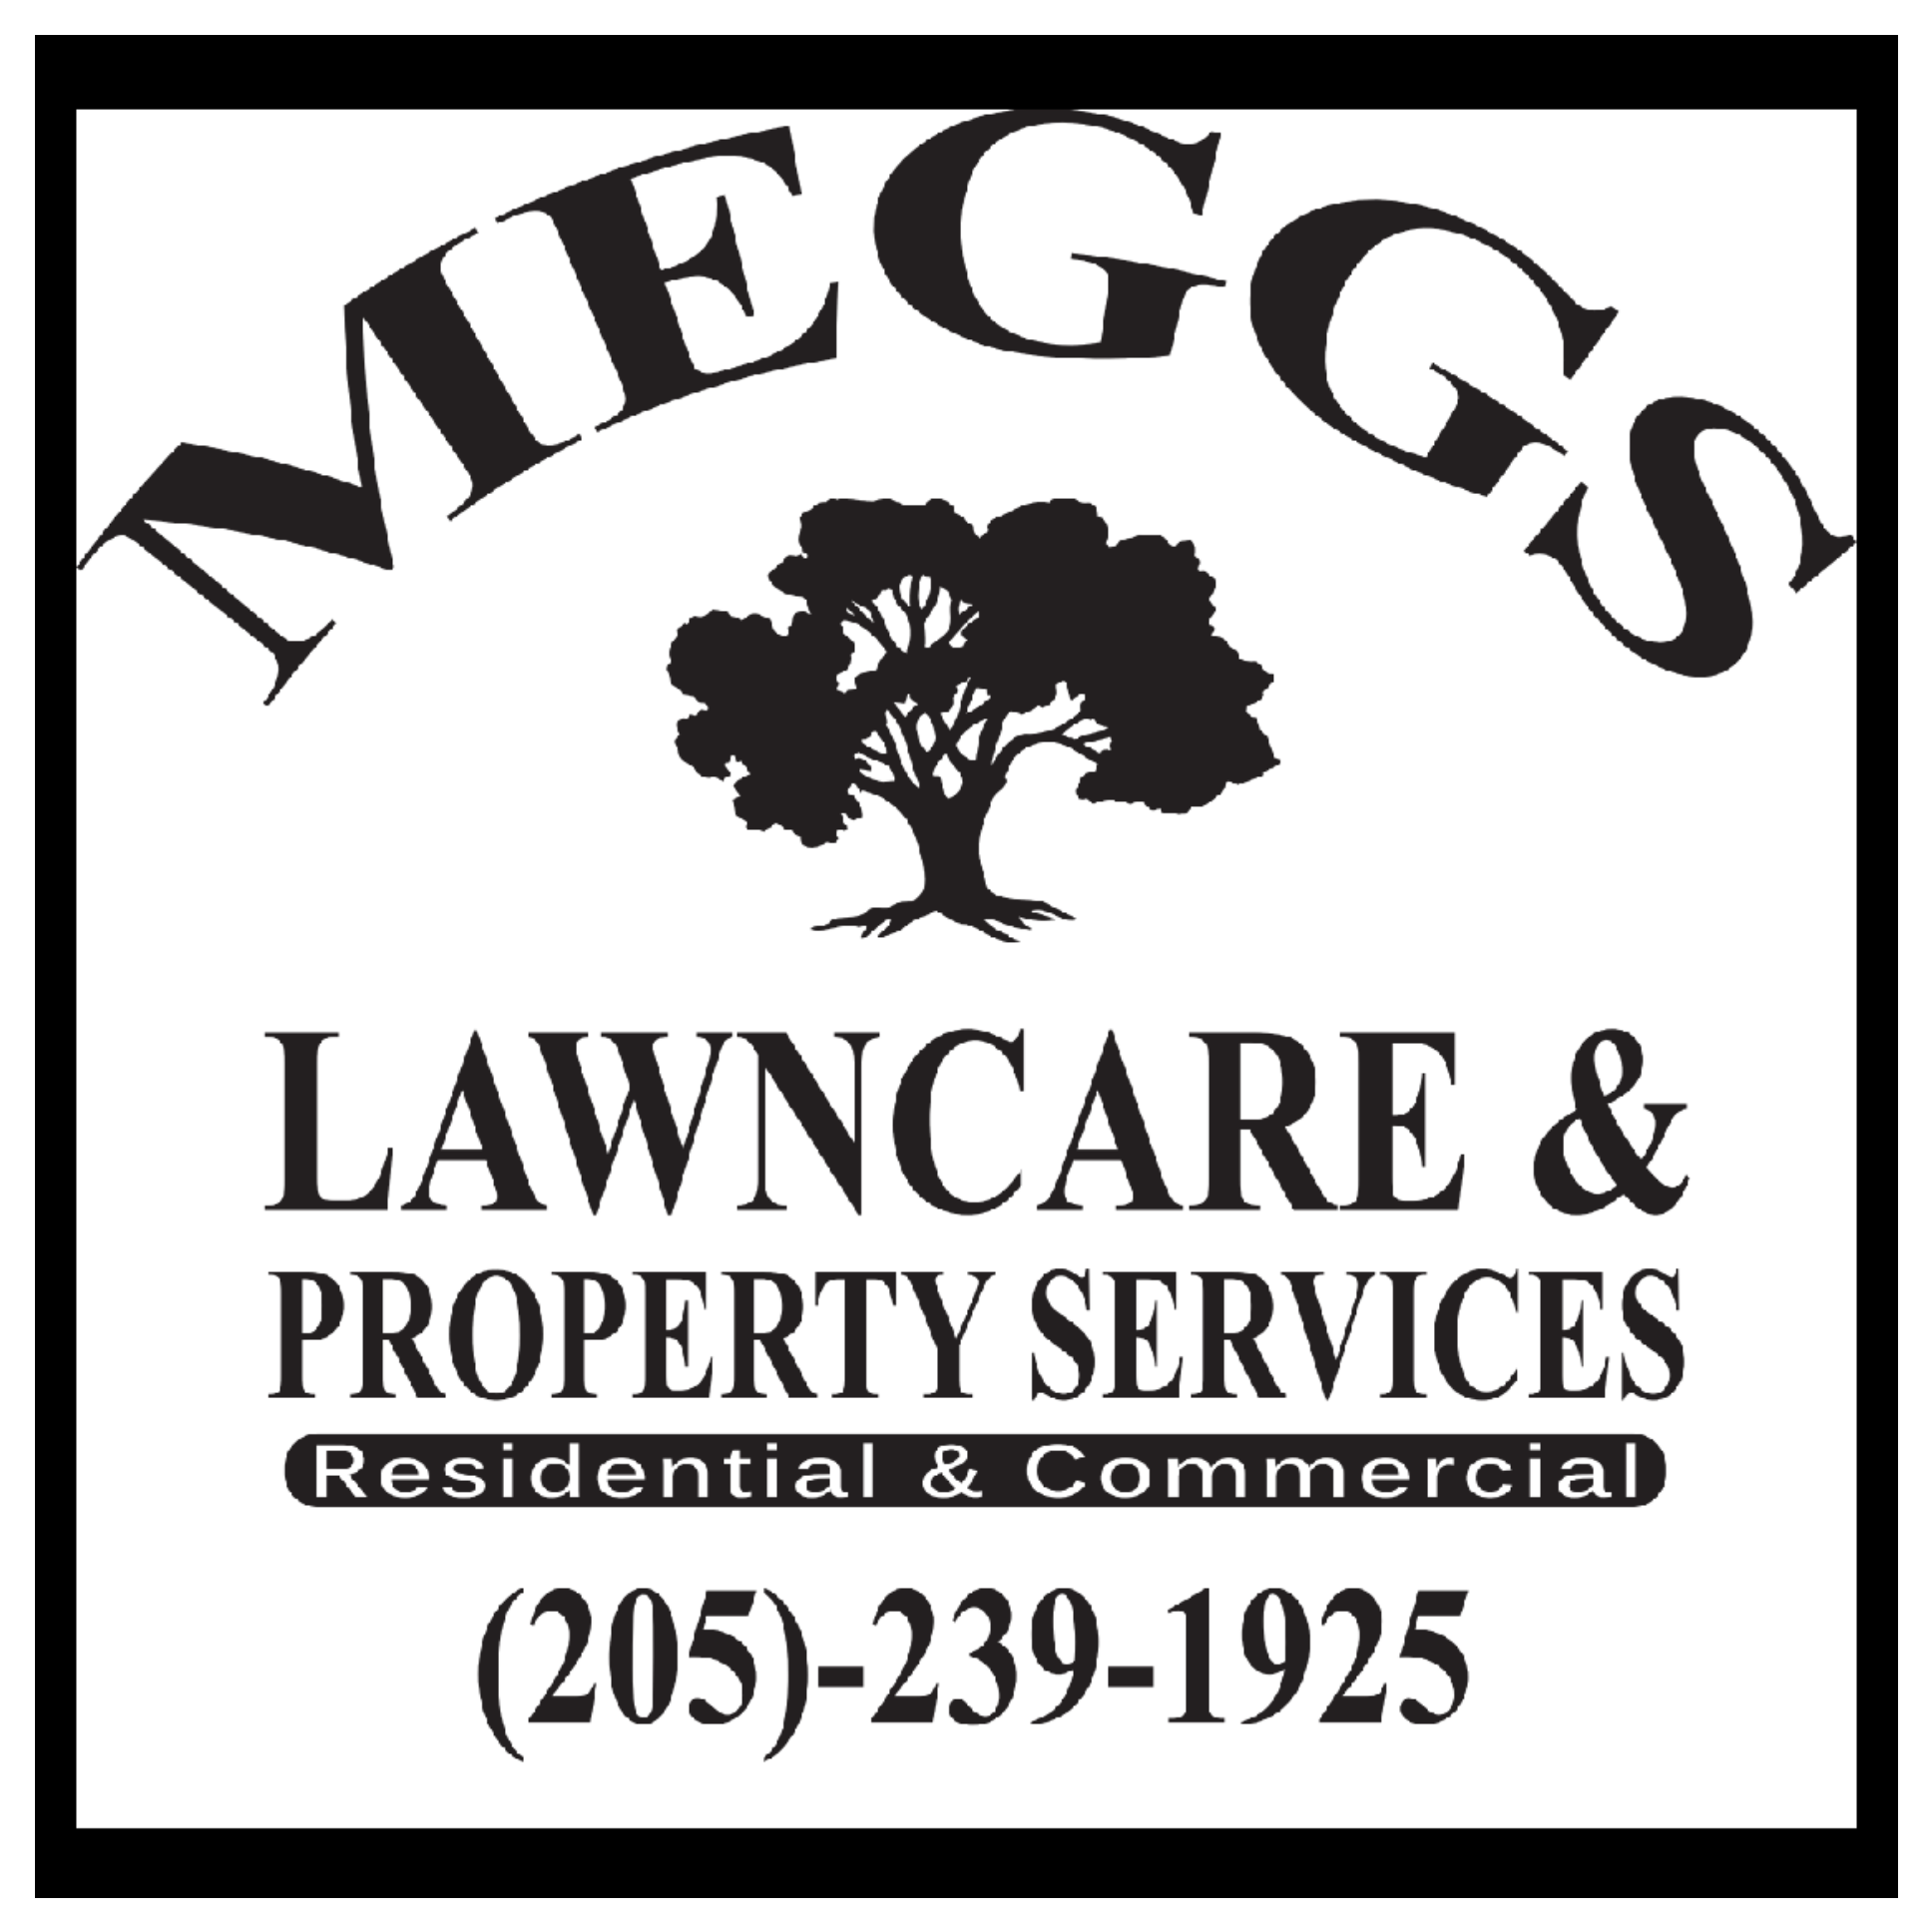 Meggs lawn care and property services